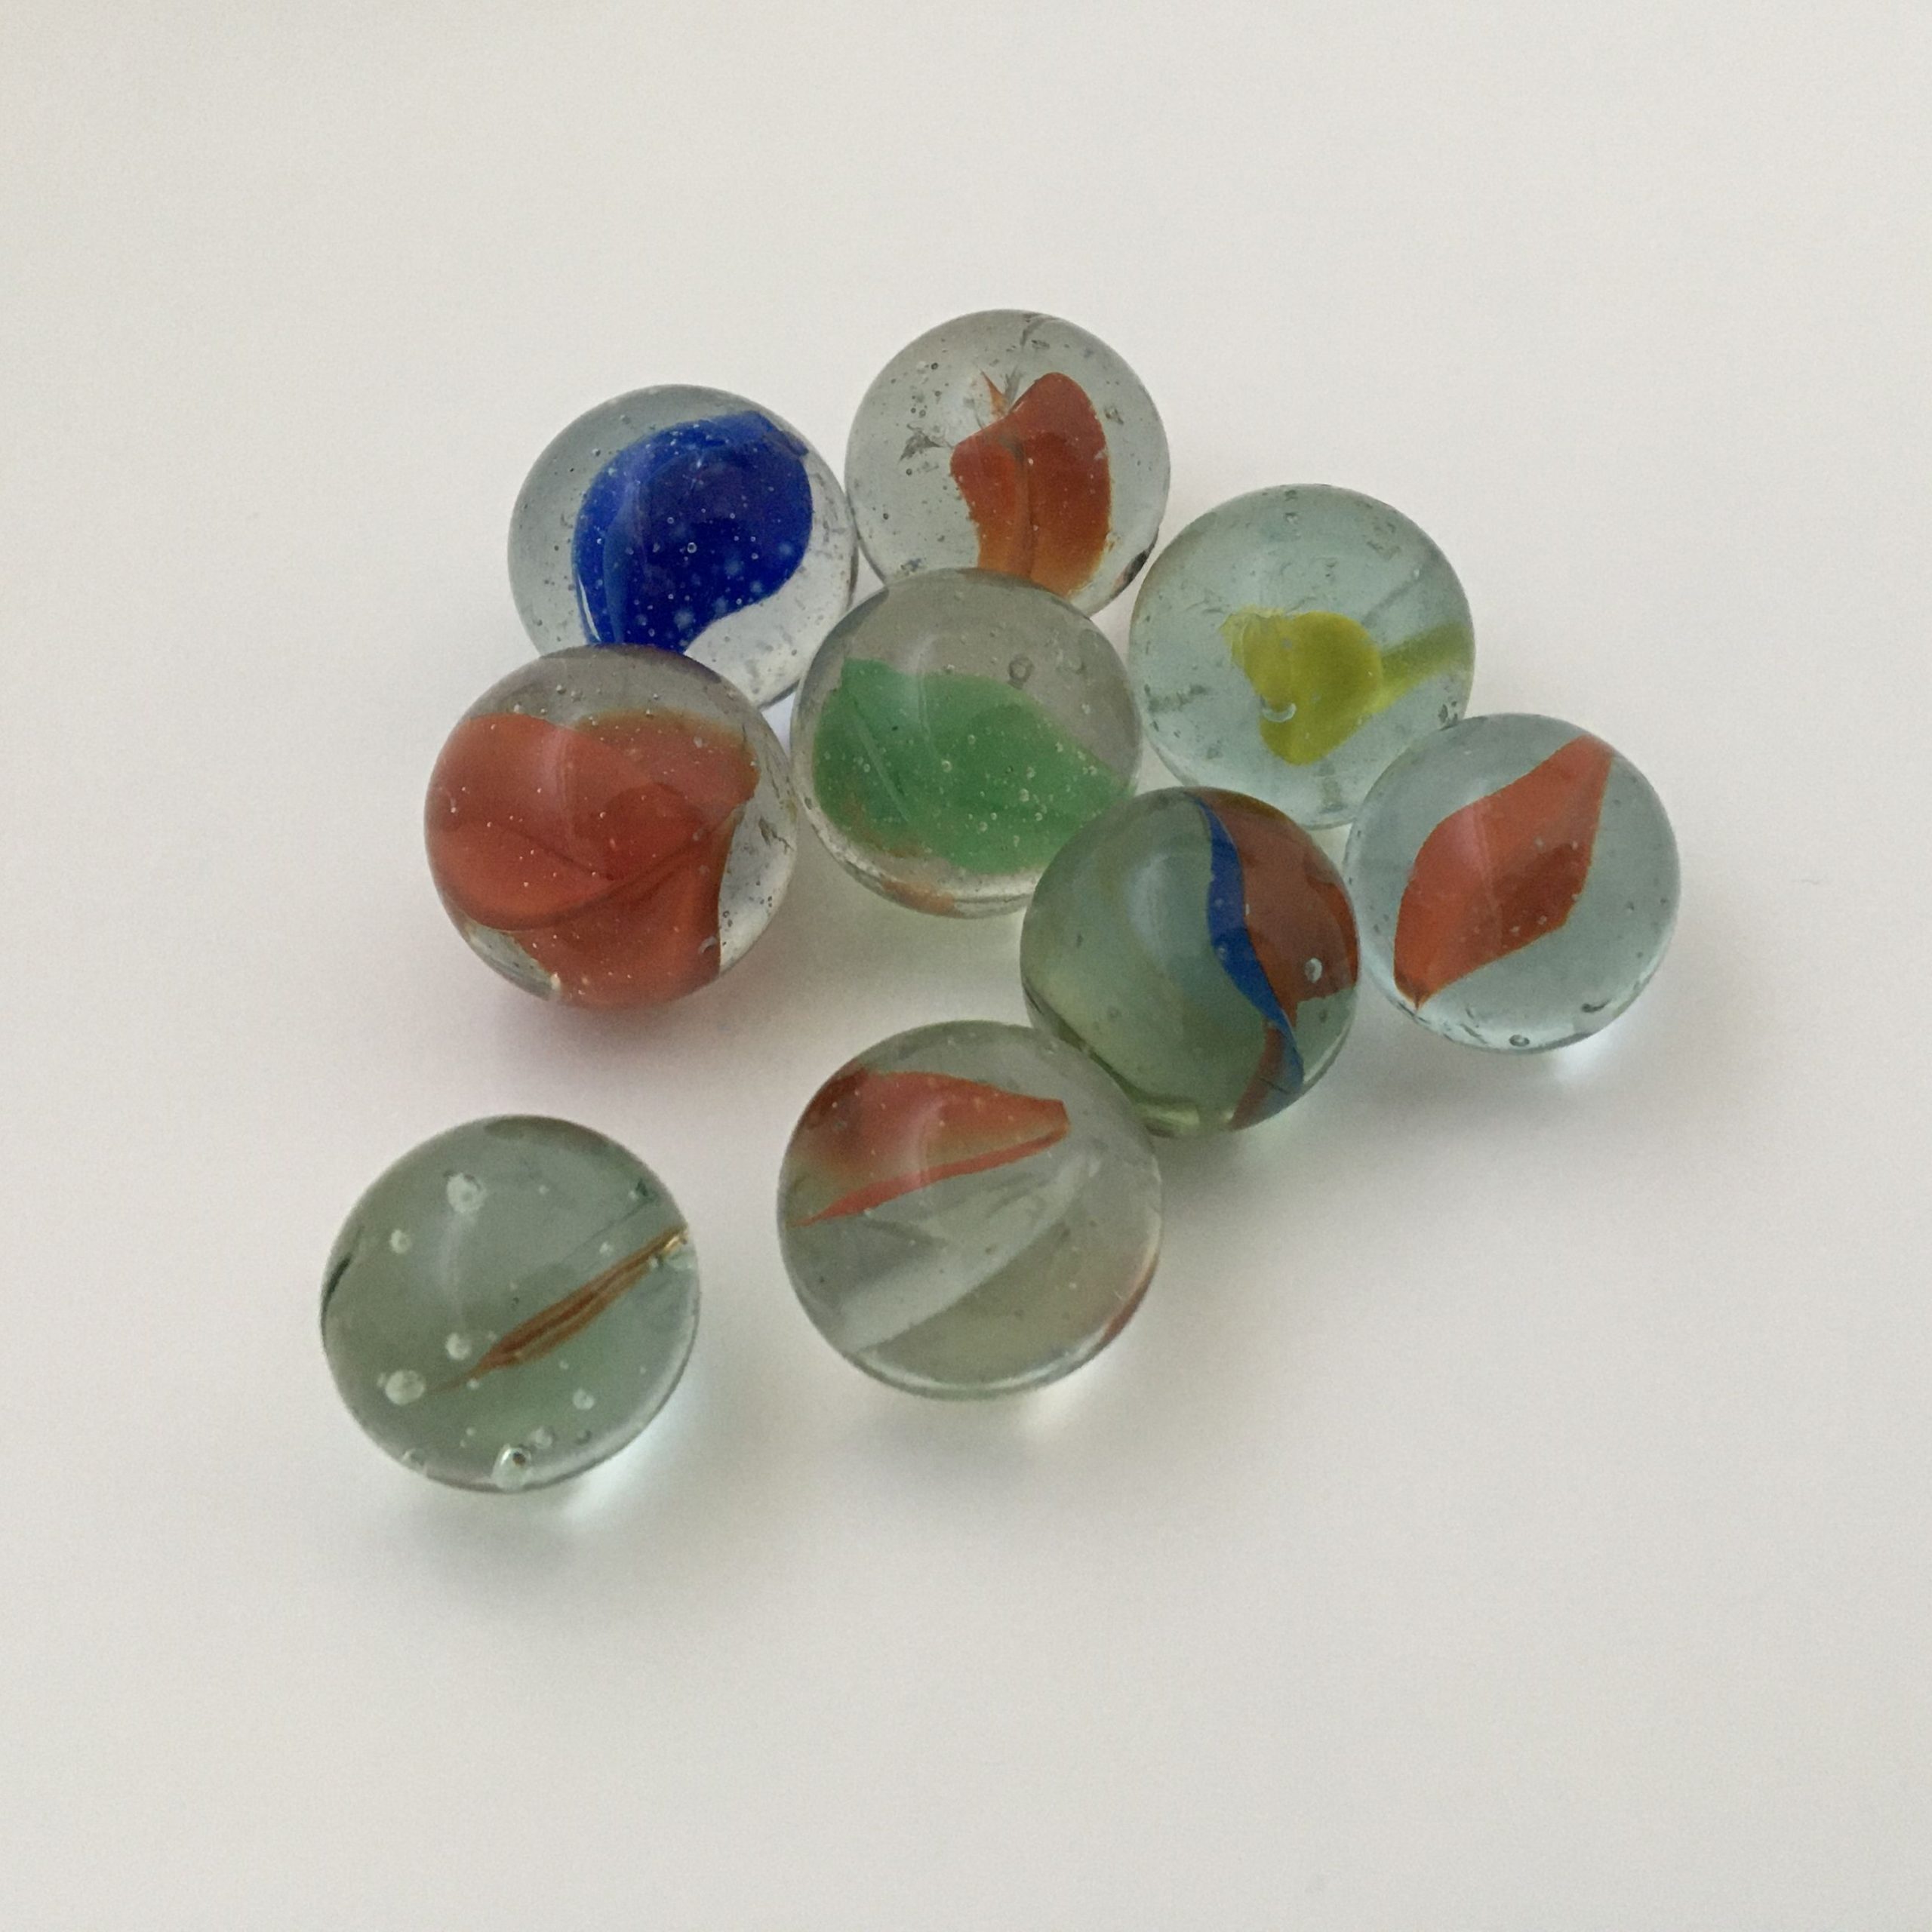 Collection of vintage cats eye marbles